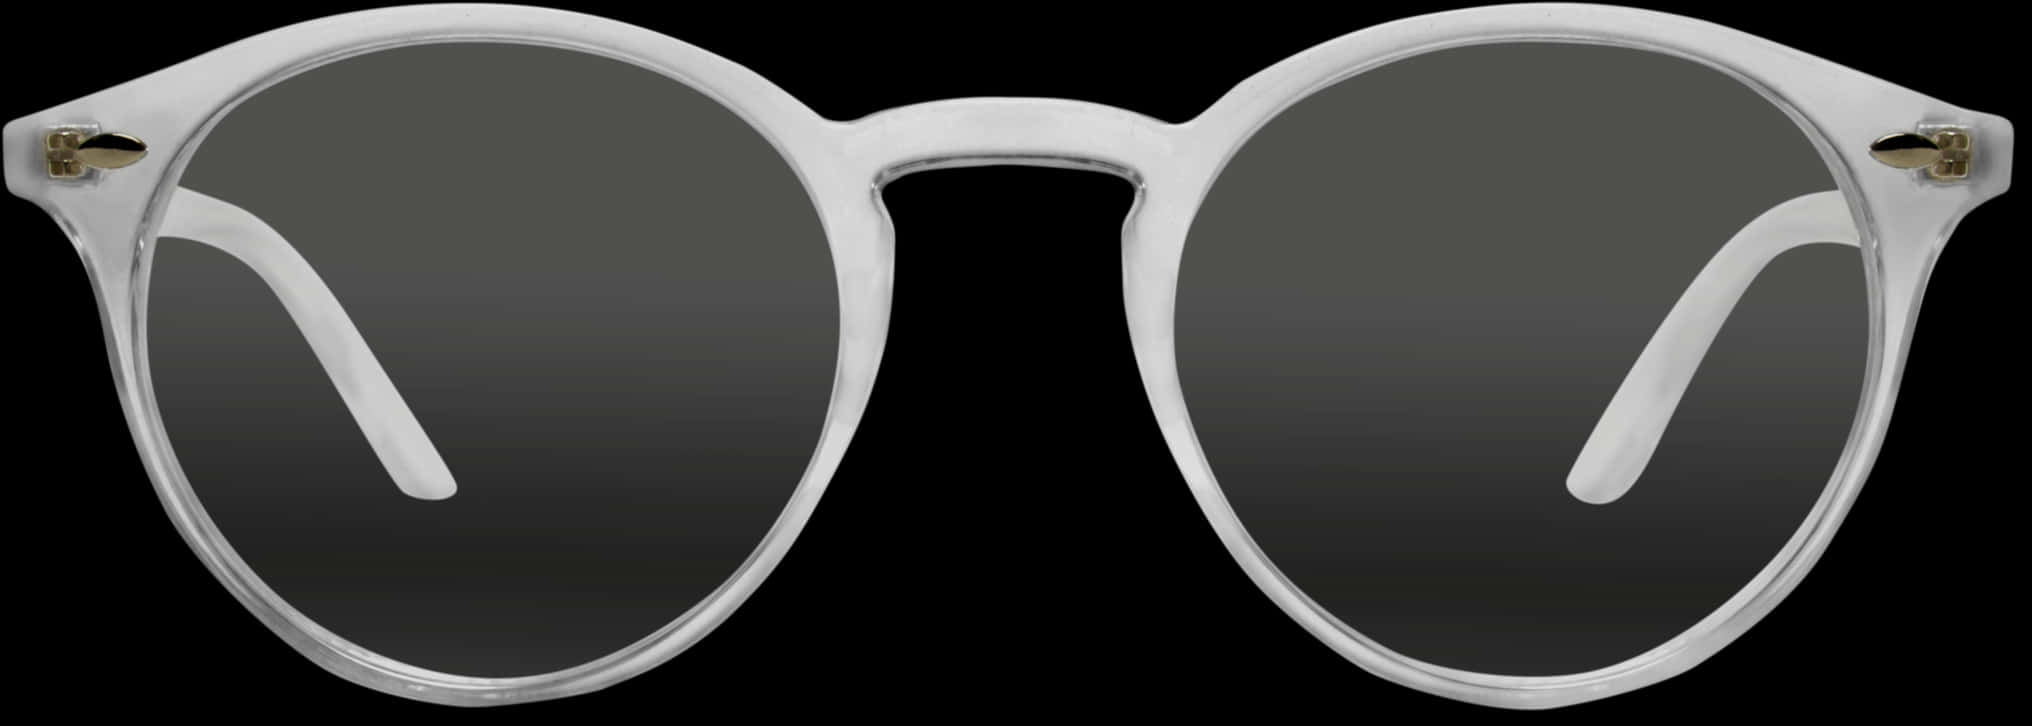 White Round Framed Sunglasses PNG image